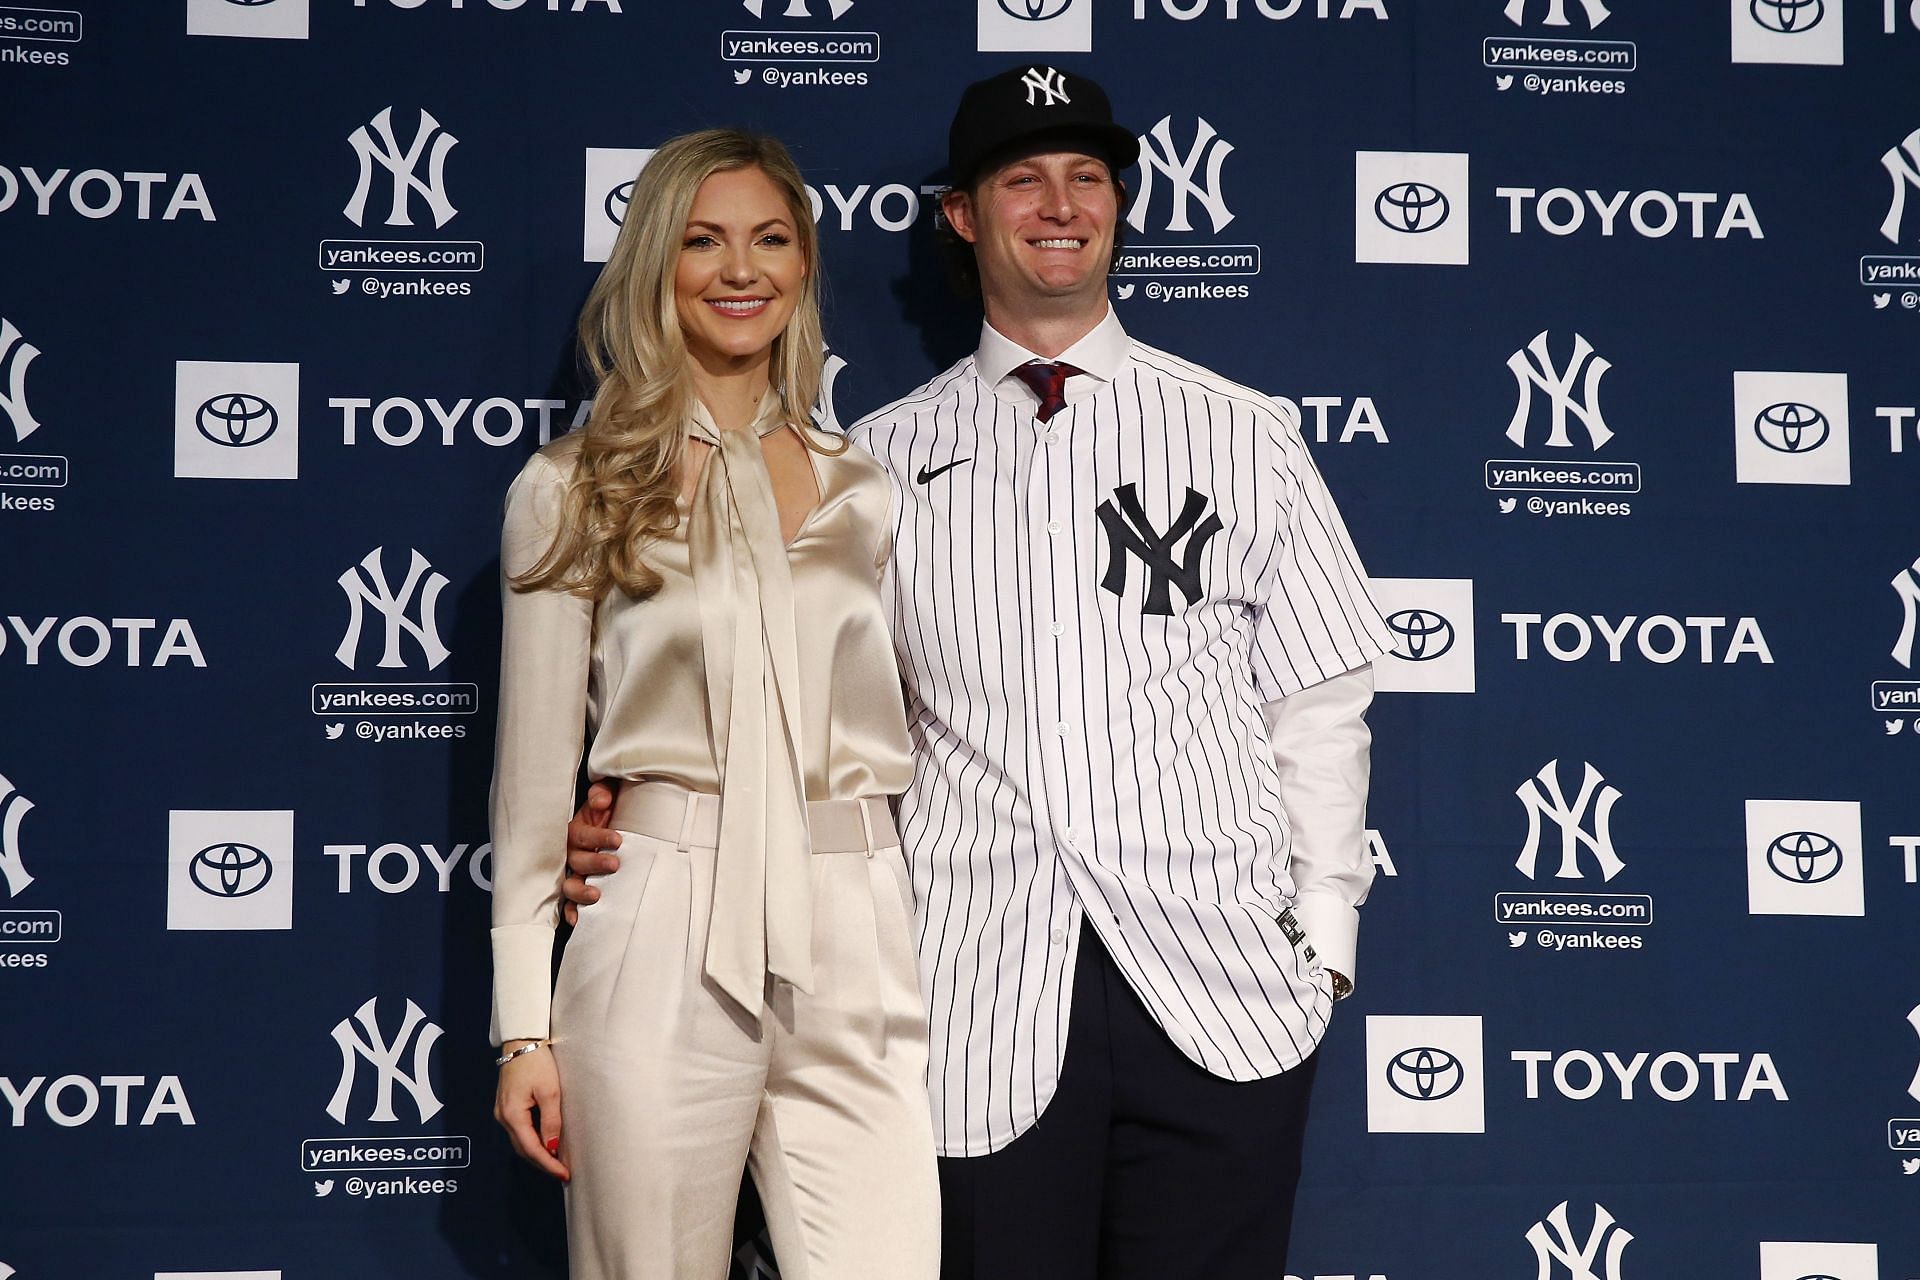 New York Yankees starting pitcher Gerrit Cole and his wife Amy